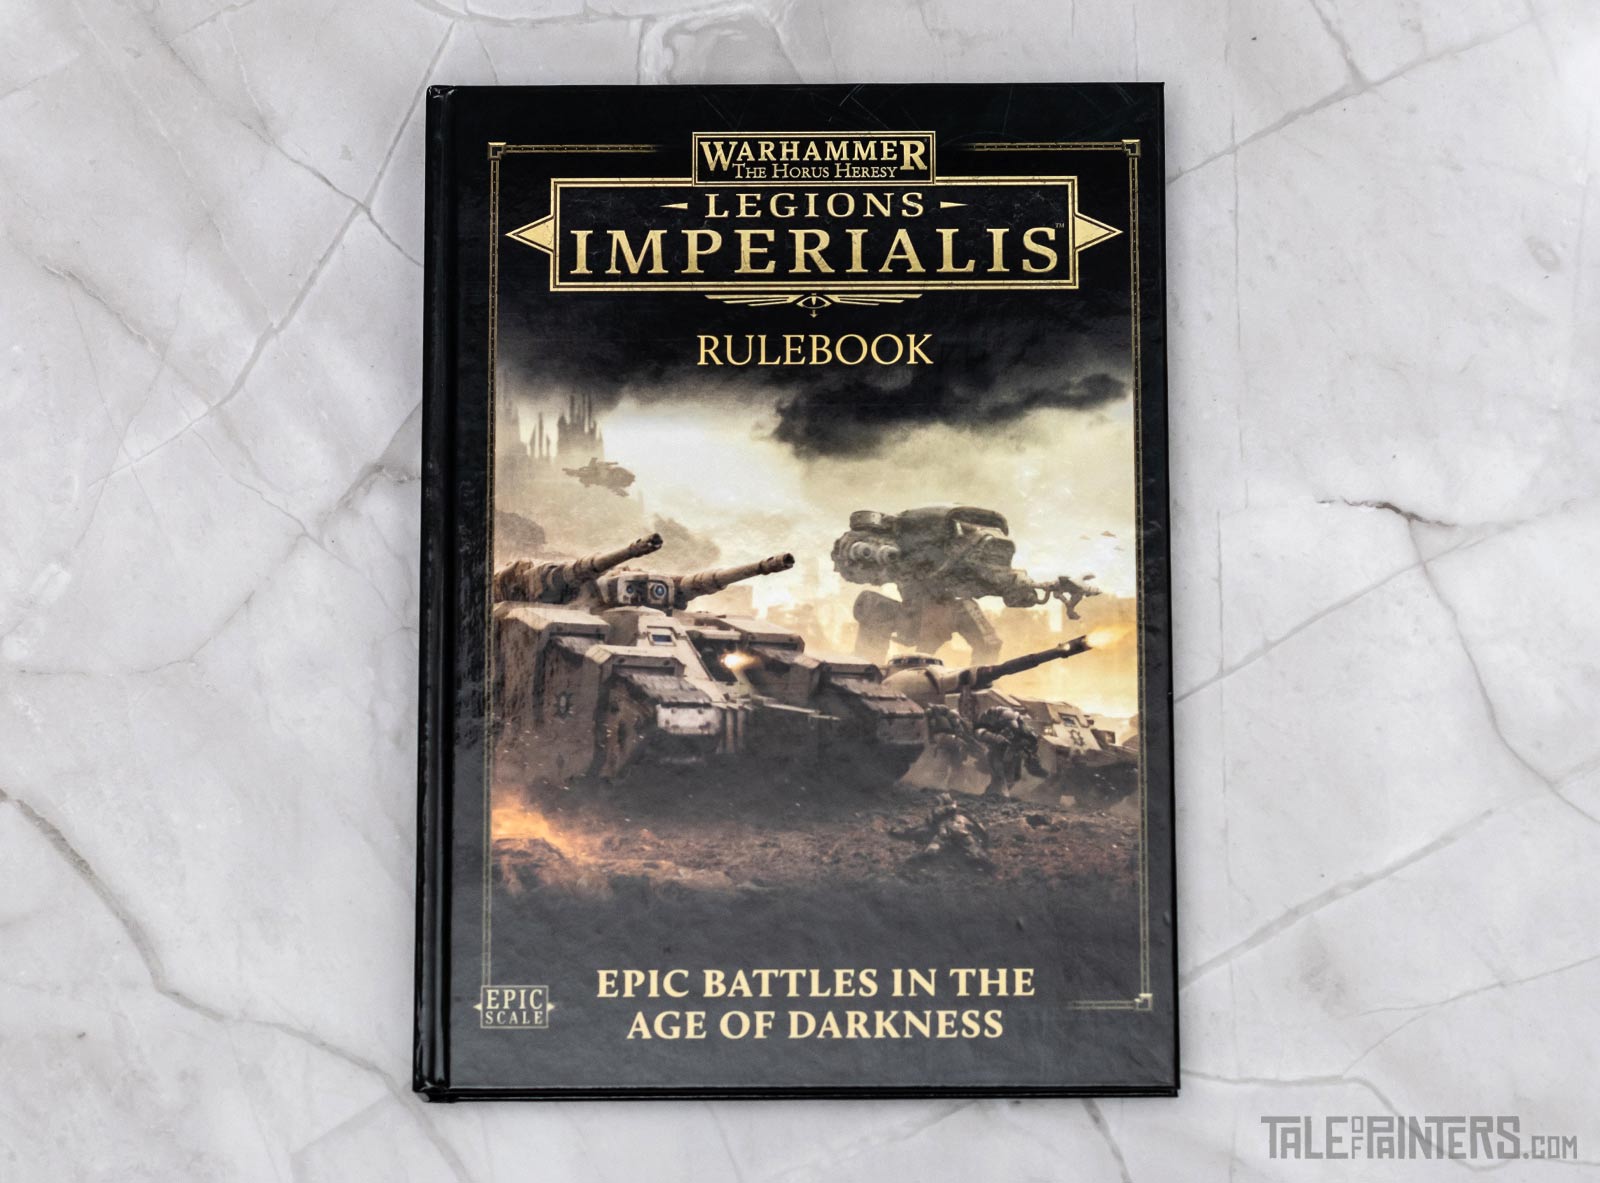 Legions Imperialis Rulebook review